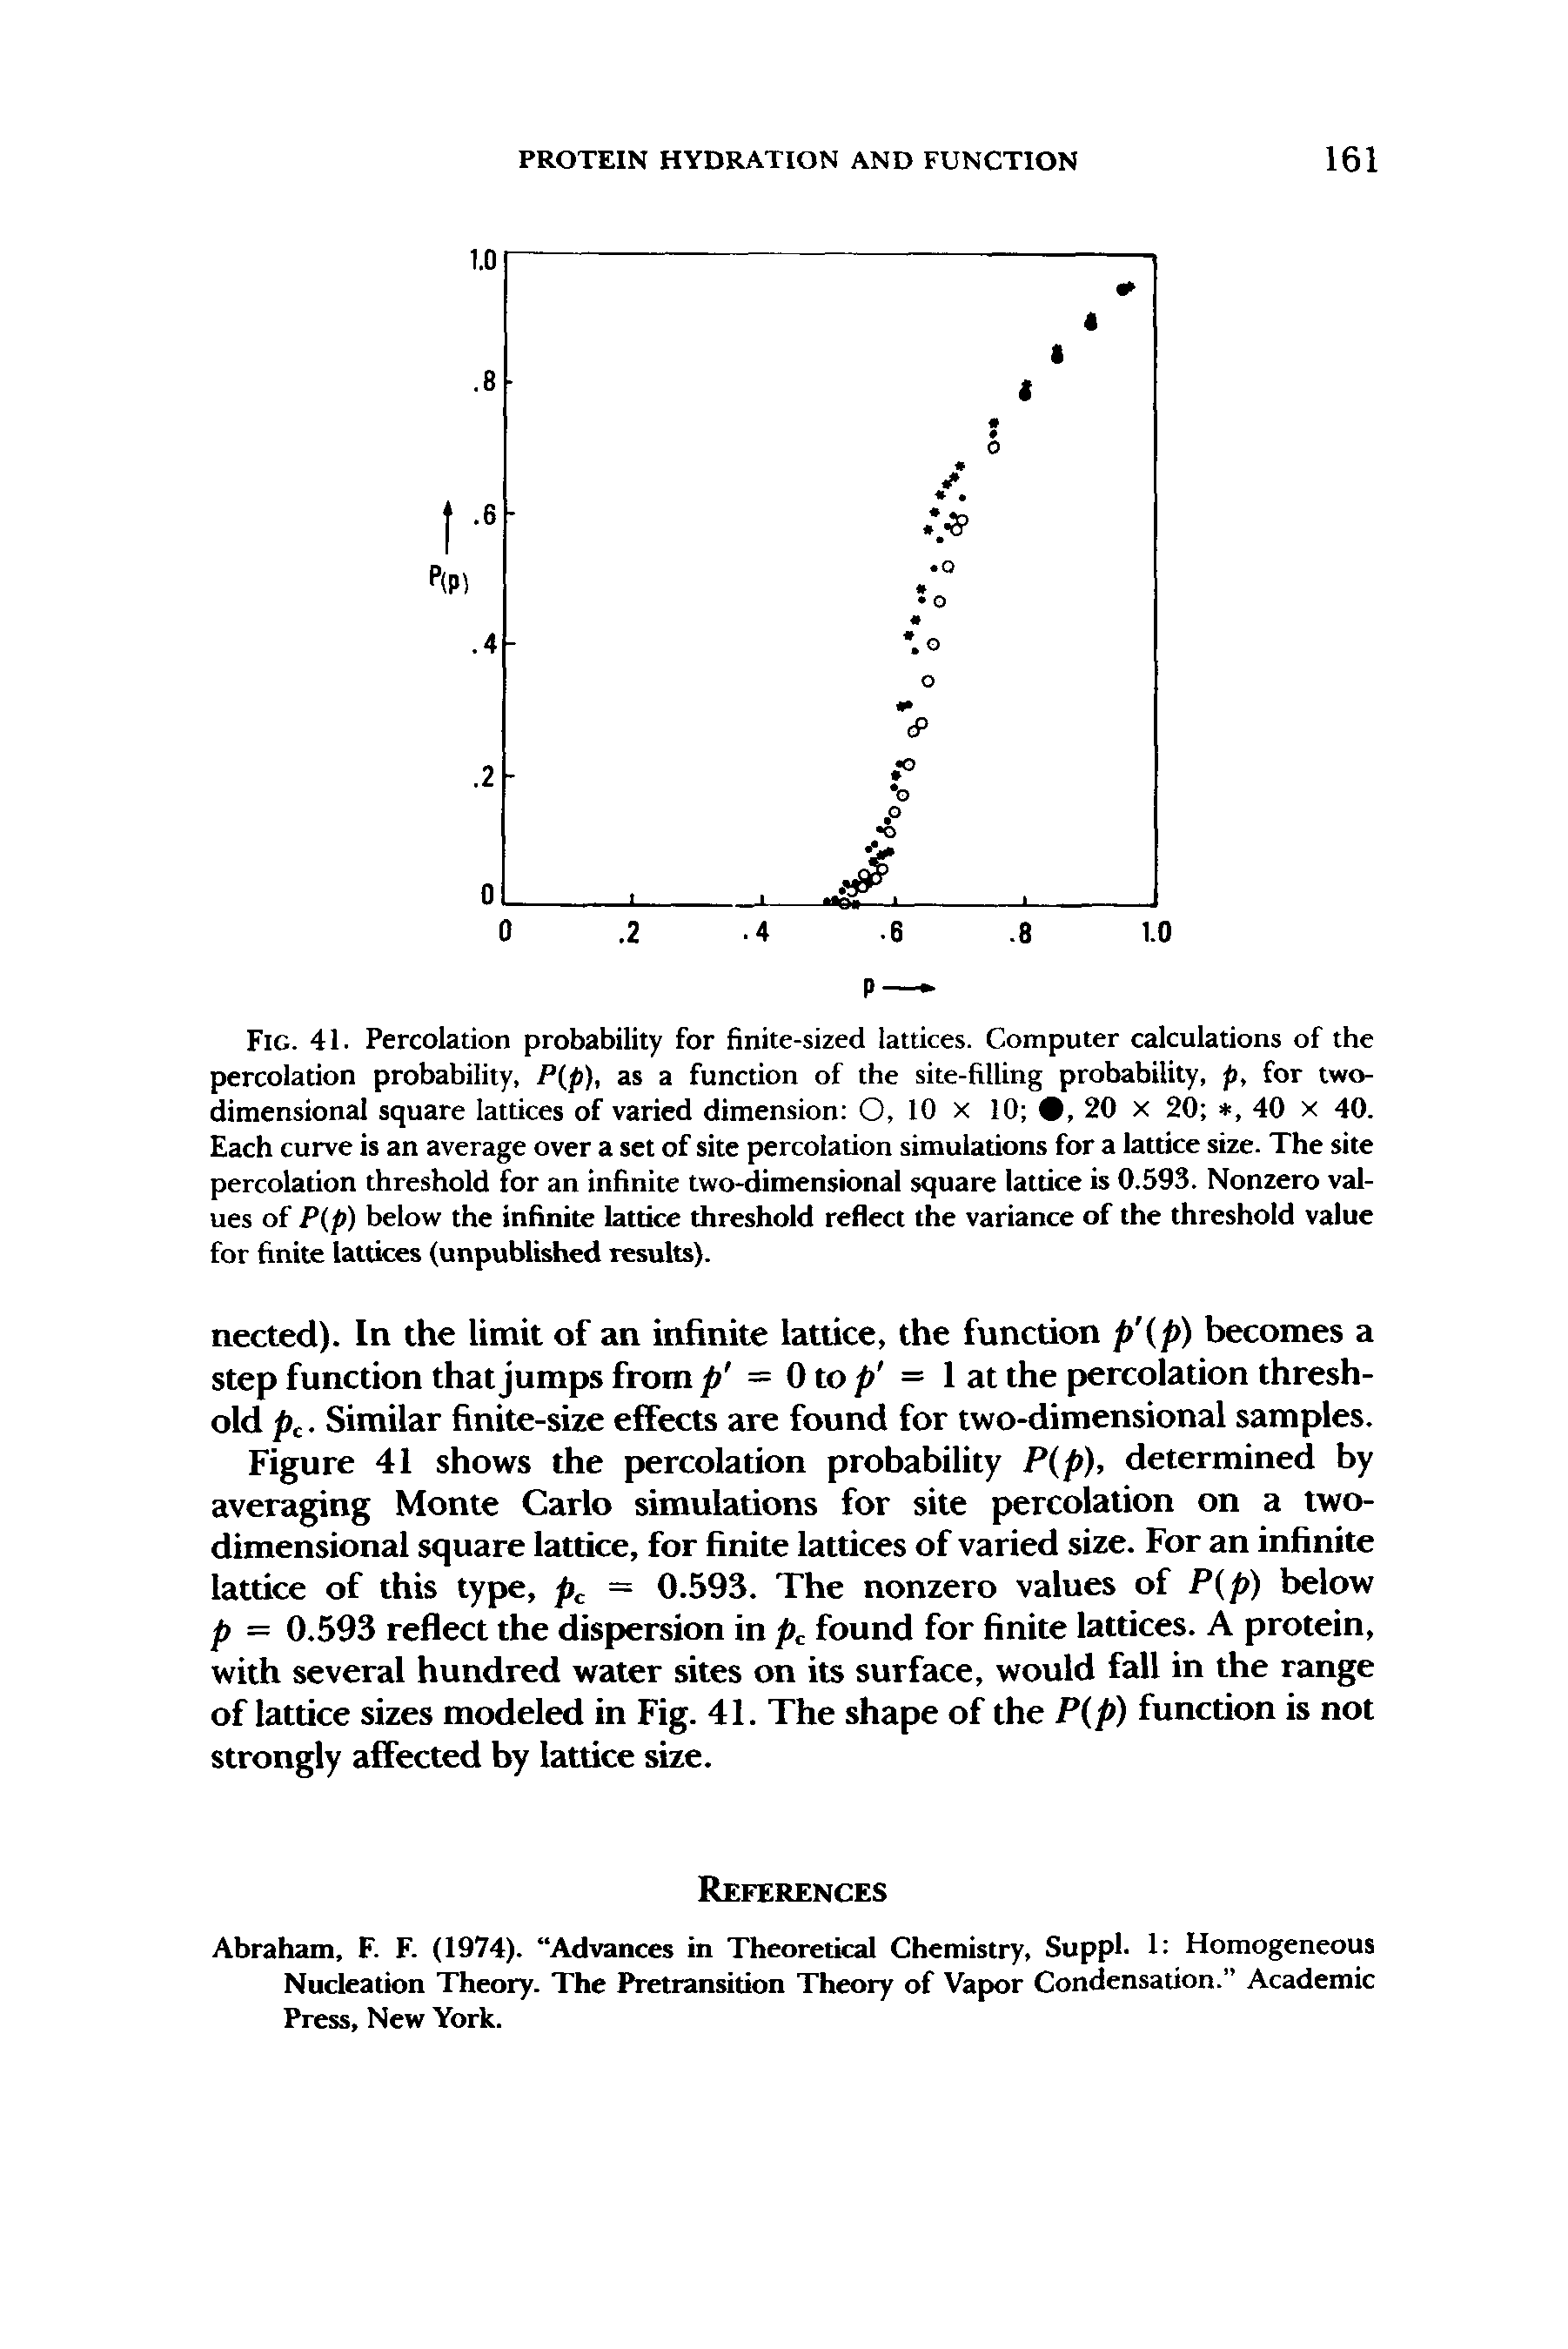 Fig. 41. Percolation probability for finite-sized lattices. Computer calculations of the percolation probability, P(p), as a function of the site-filling probability, p, for two-dimensional square lattices of varied dimension O, 10 x 10 , 20 x 20 , 40 x 40. Each curve is an average over a set of site percolation simulations for a lattice size. The site percolation threshold for an infinite two-dimensional square lattice is 0.593. Nonzero values of P p) below the infinite lattice threshold reflect the variance of the threshold value for finite lattices (unpublished results).